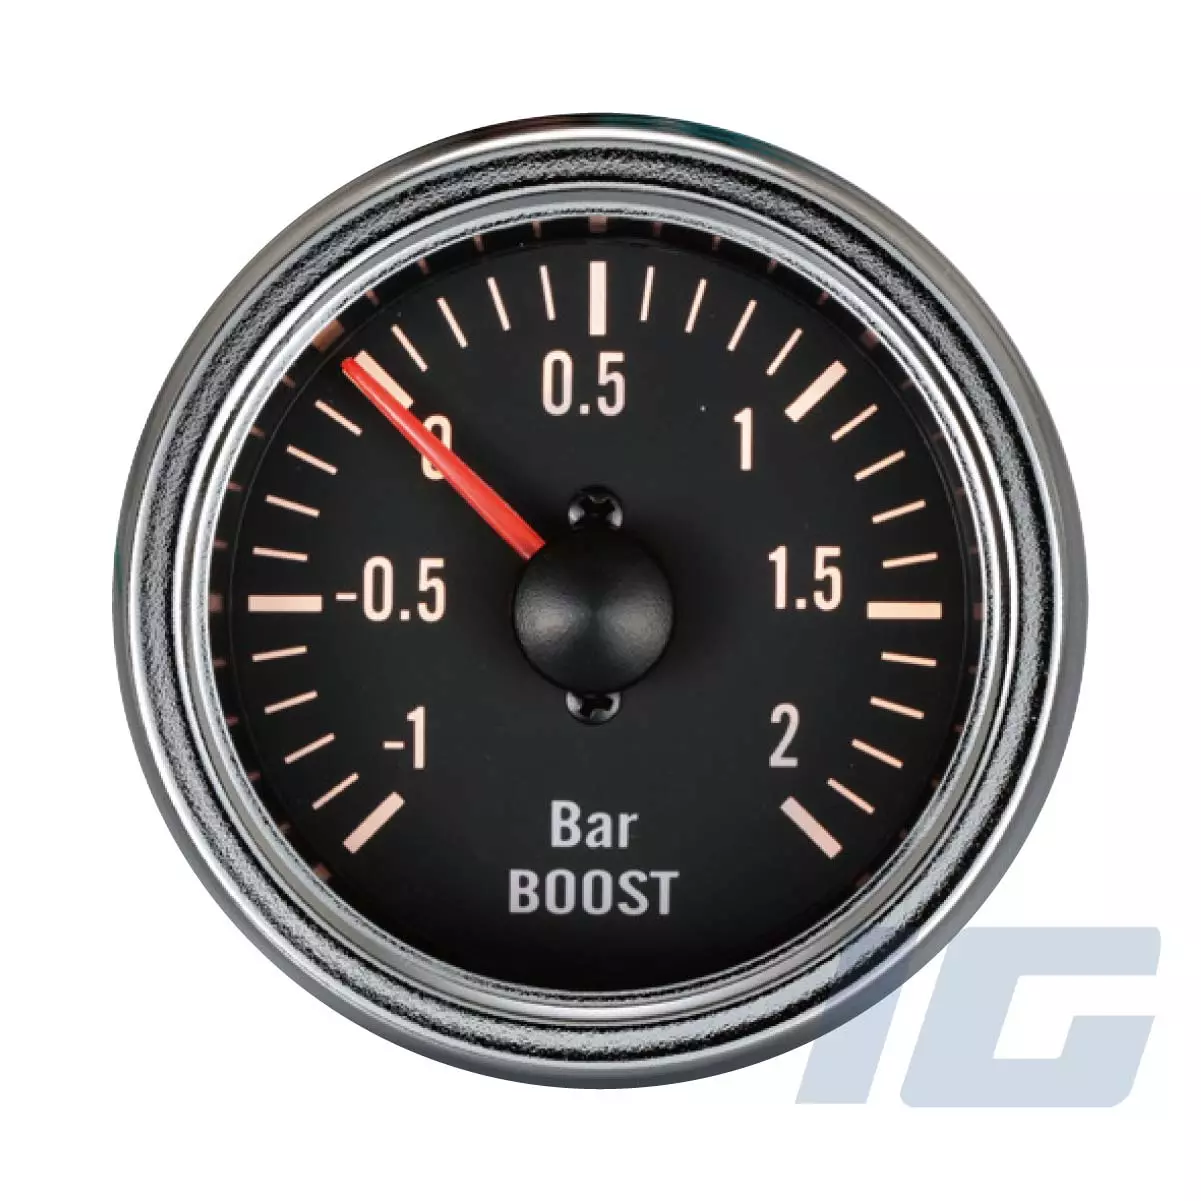 igauge, DIGITAL PSI BAR TURBO BOOST VACUUM GAUGE WITH INSTALL KIT T-FITTING : MECHANICAL, ELECTRONIC, SUPERCHARGER